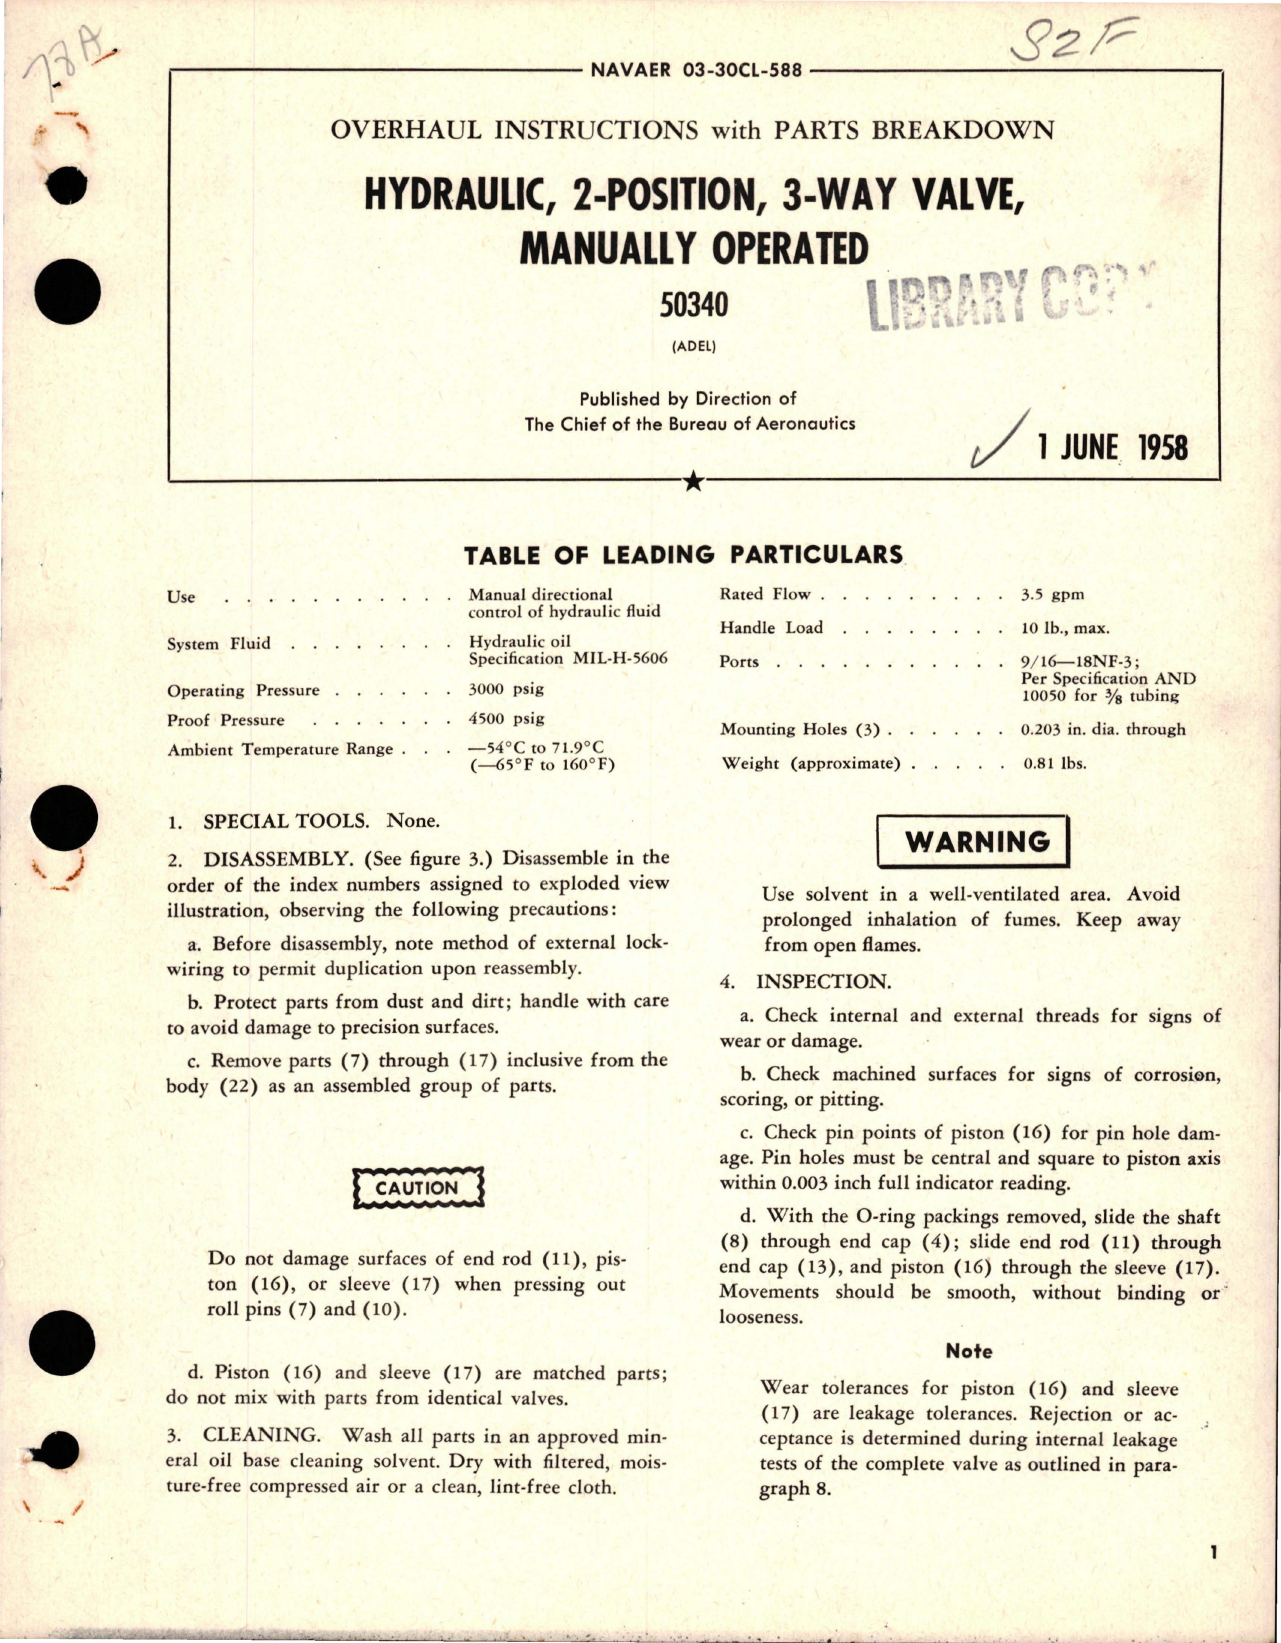 Sample page 1 from AirCorps Library document: Overhaul Instructions with Parts for Manually Operated Hydraulic 2-Positioin 3-Way Valve - 50340 